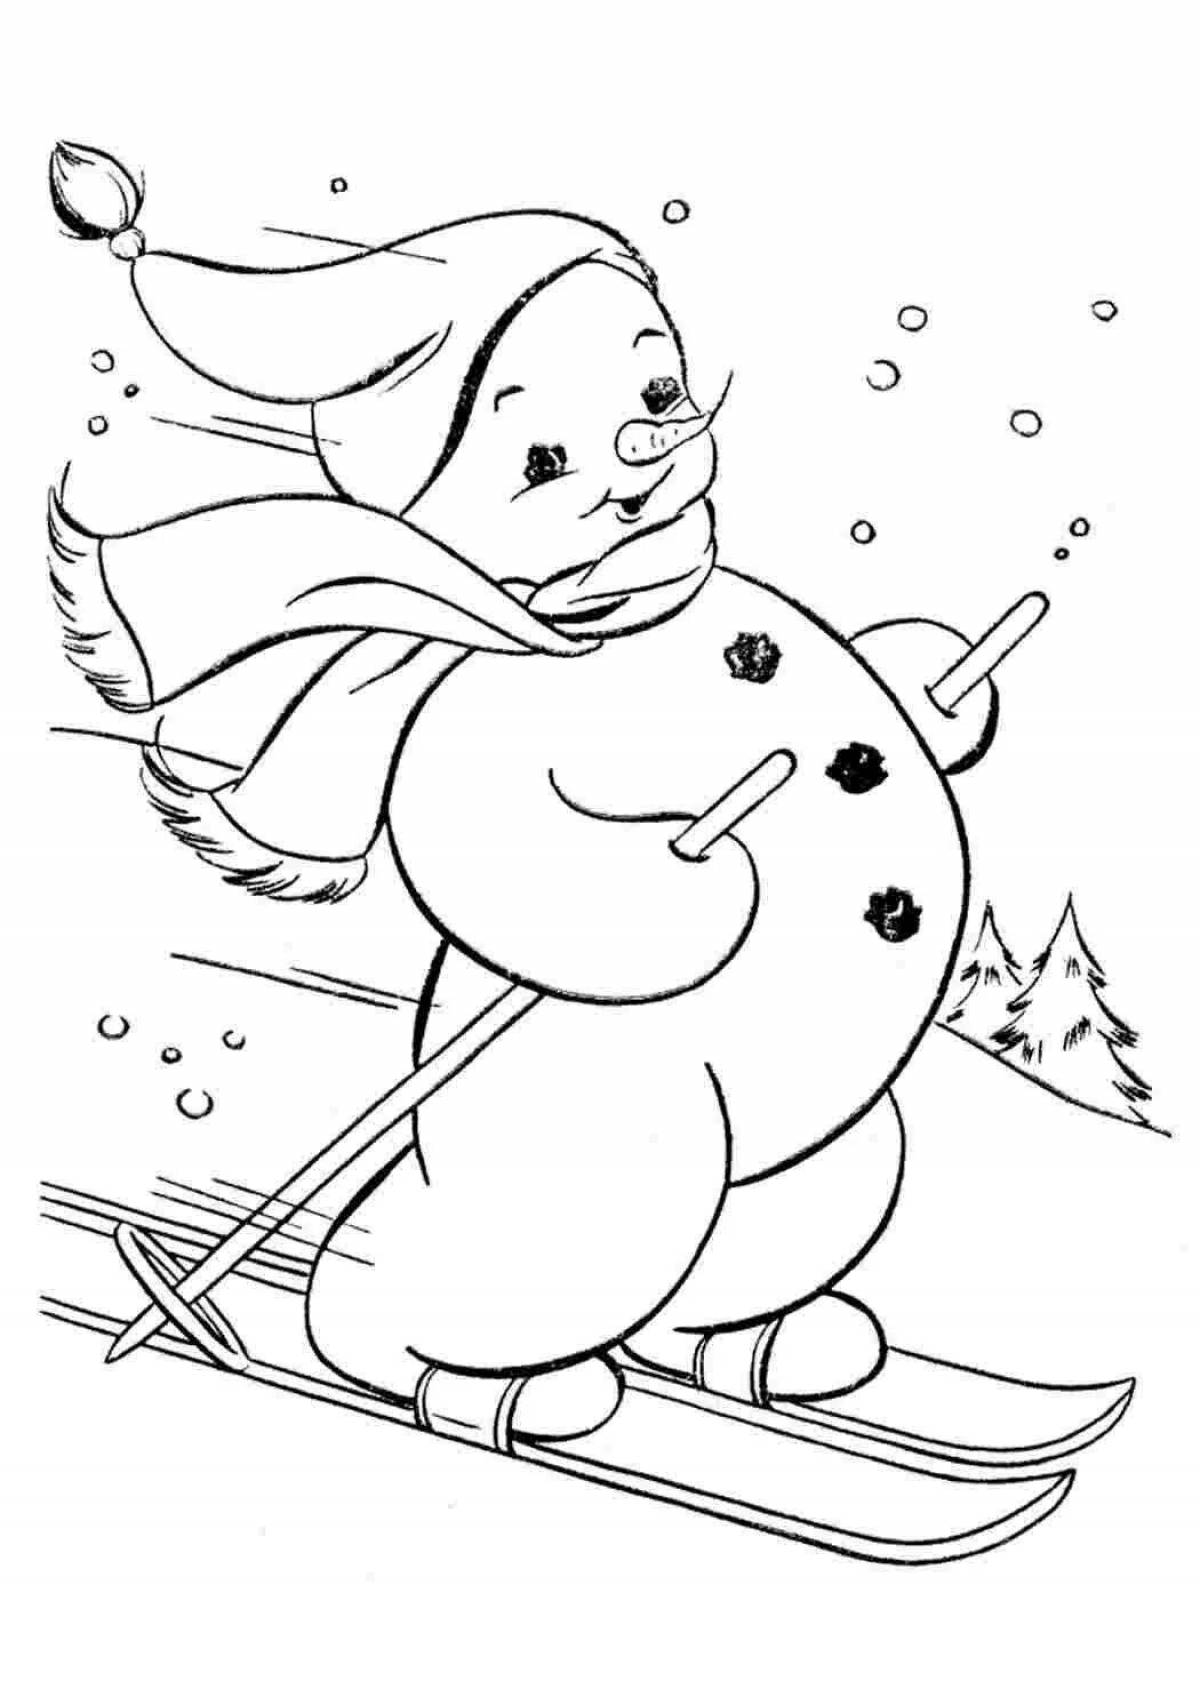 Serendipitous coloring page 3 4 года зима